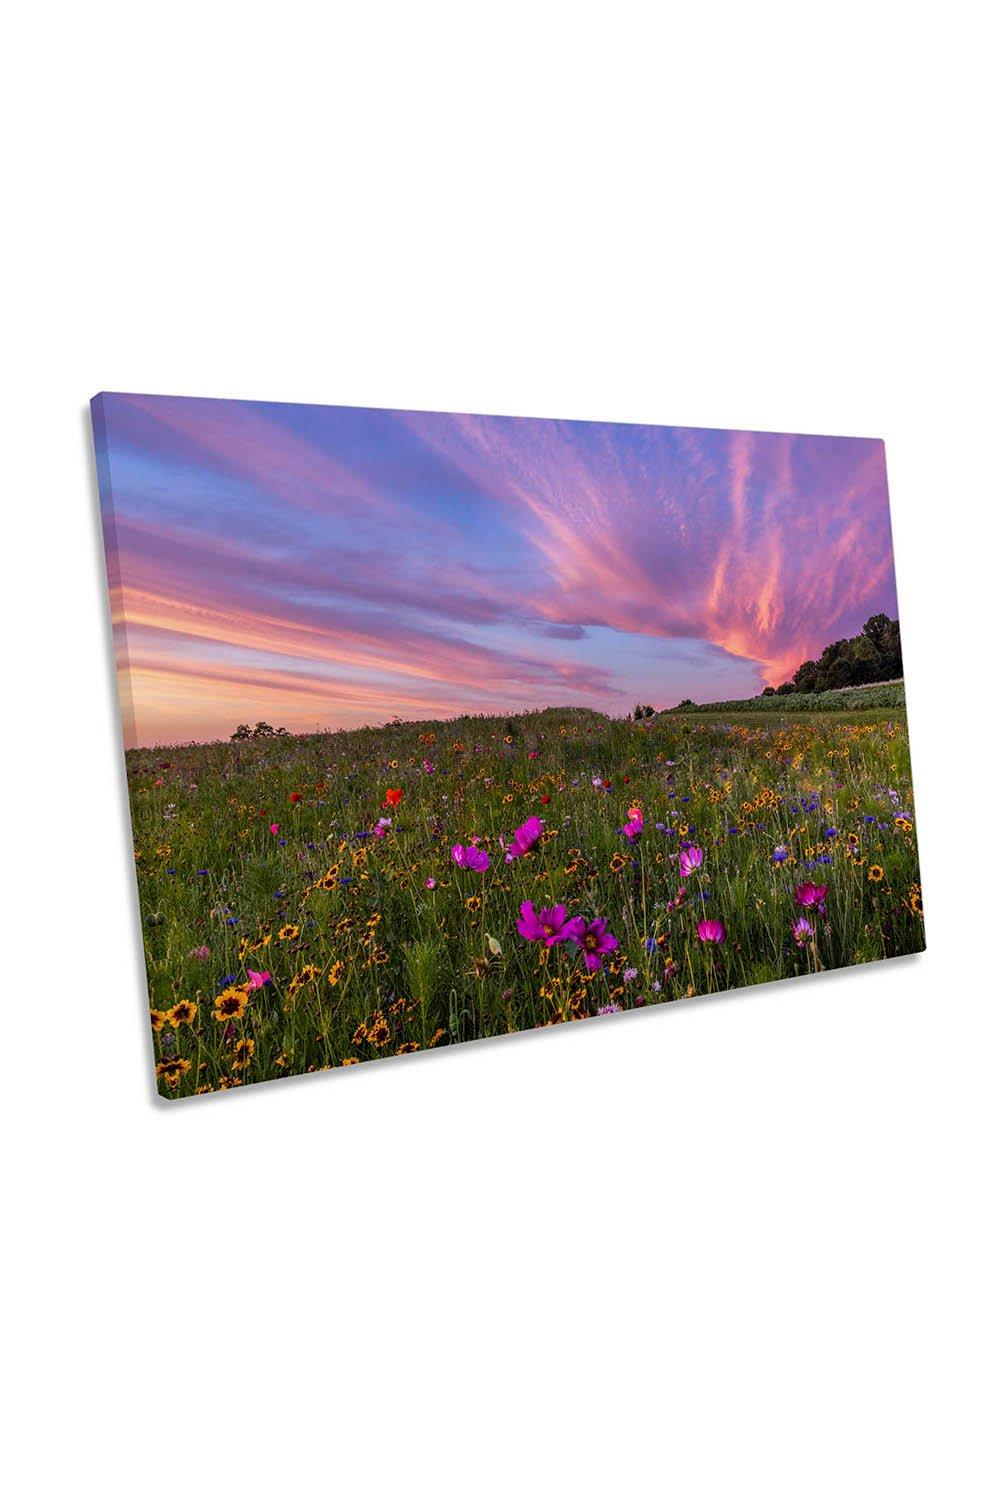 Rosy Flower Field Meadow Sunset Canvas Wall Art Picture Print